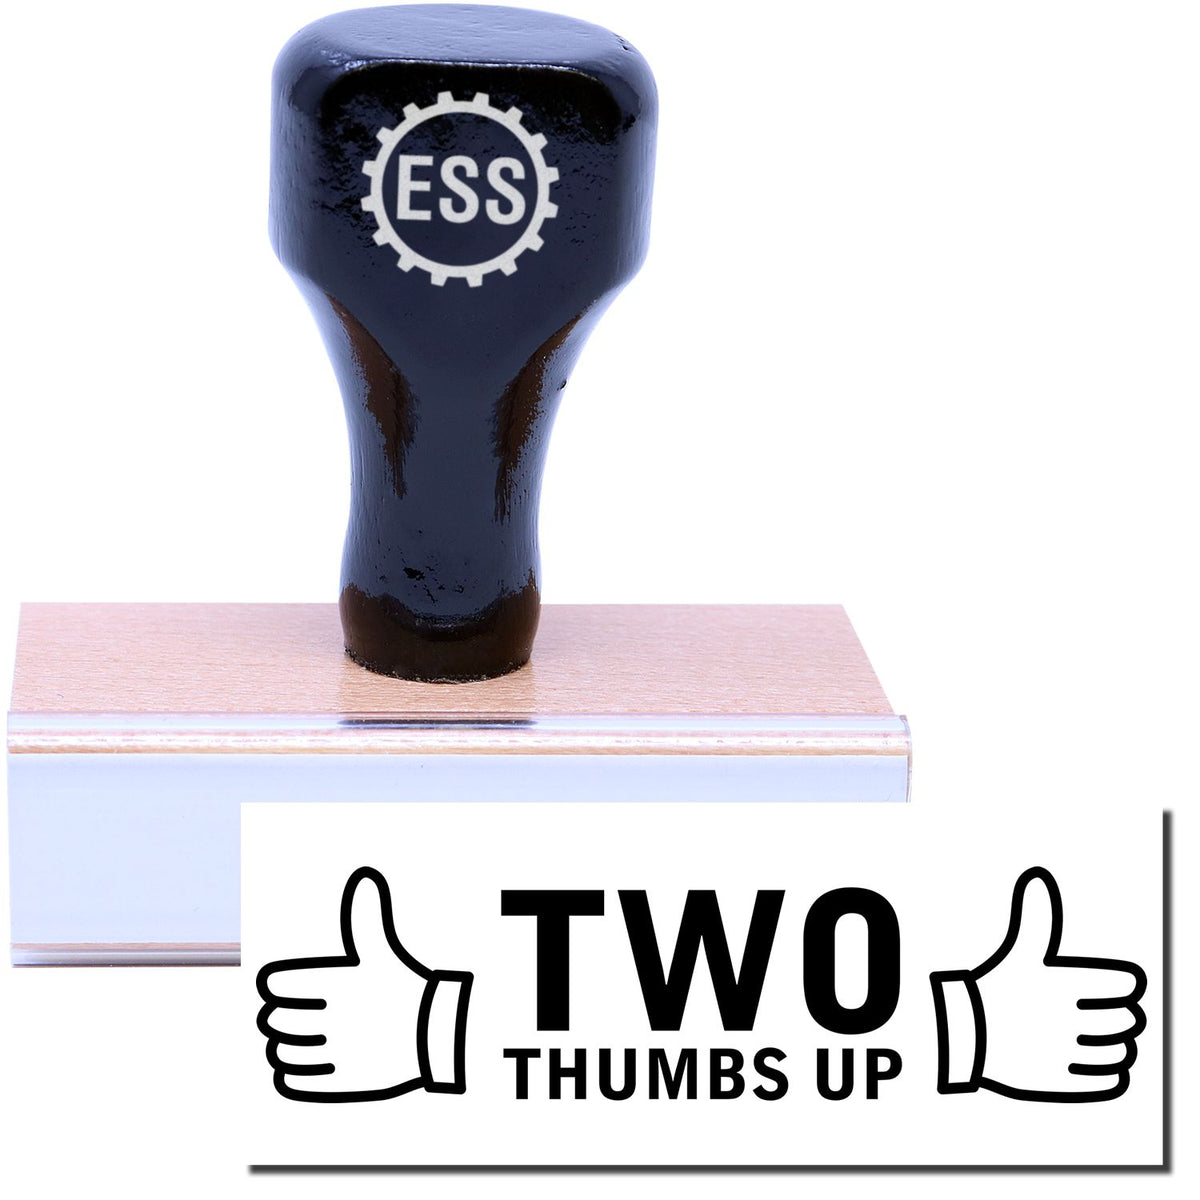 A stock office rubber stamp with a stamped image showing how the text &quot;TWO THUMBS UP&quot; in a large font with two thumbs pointing up on each side of the text is displayed after stamping.